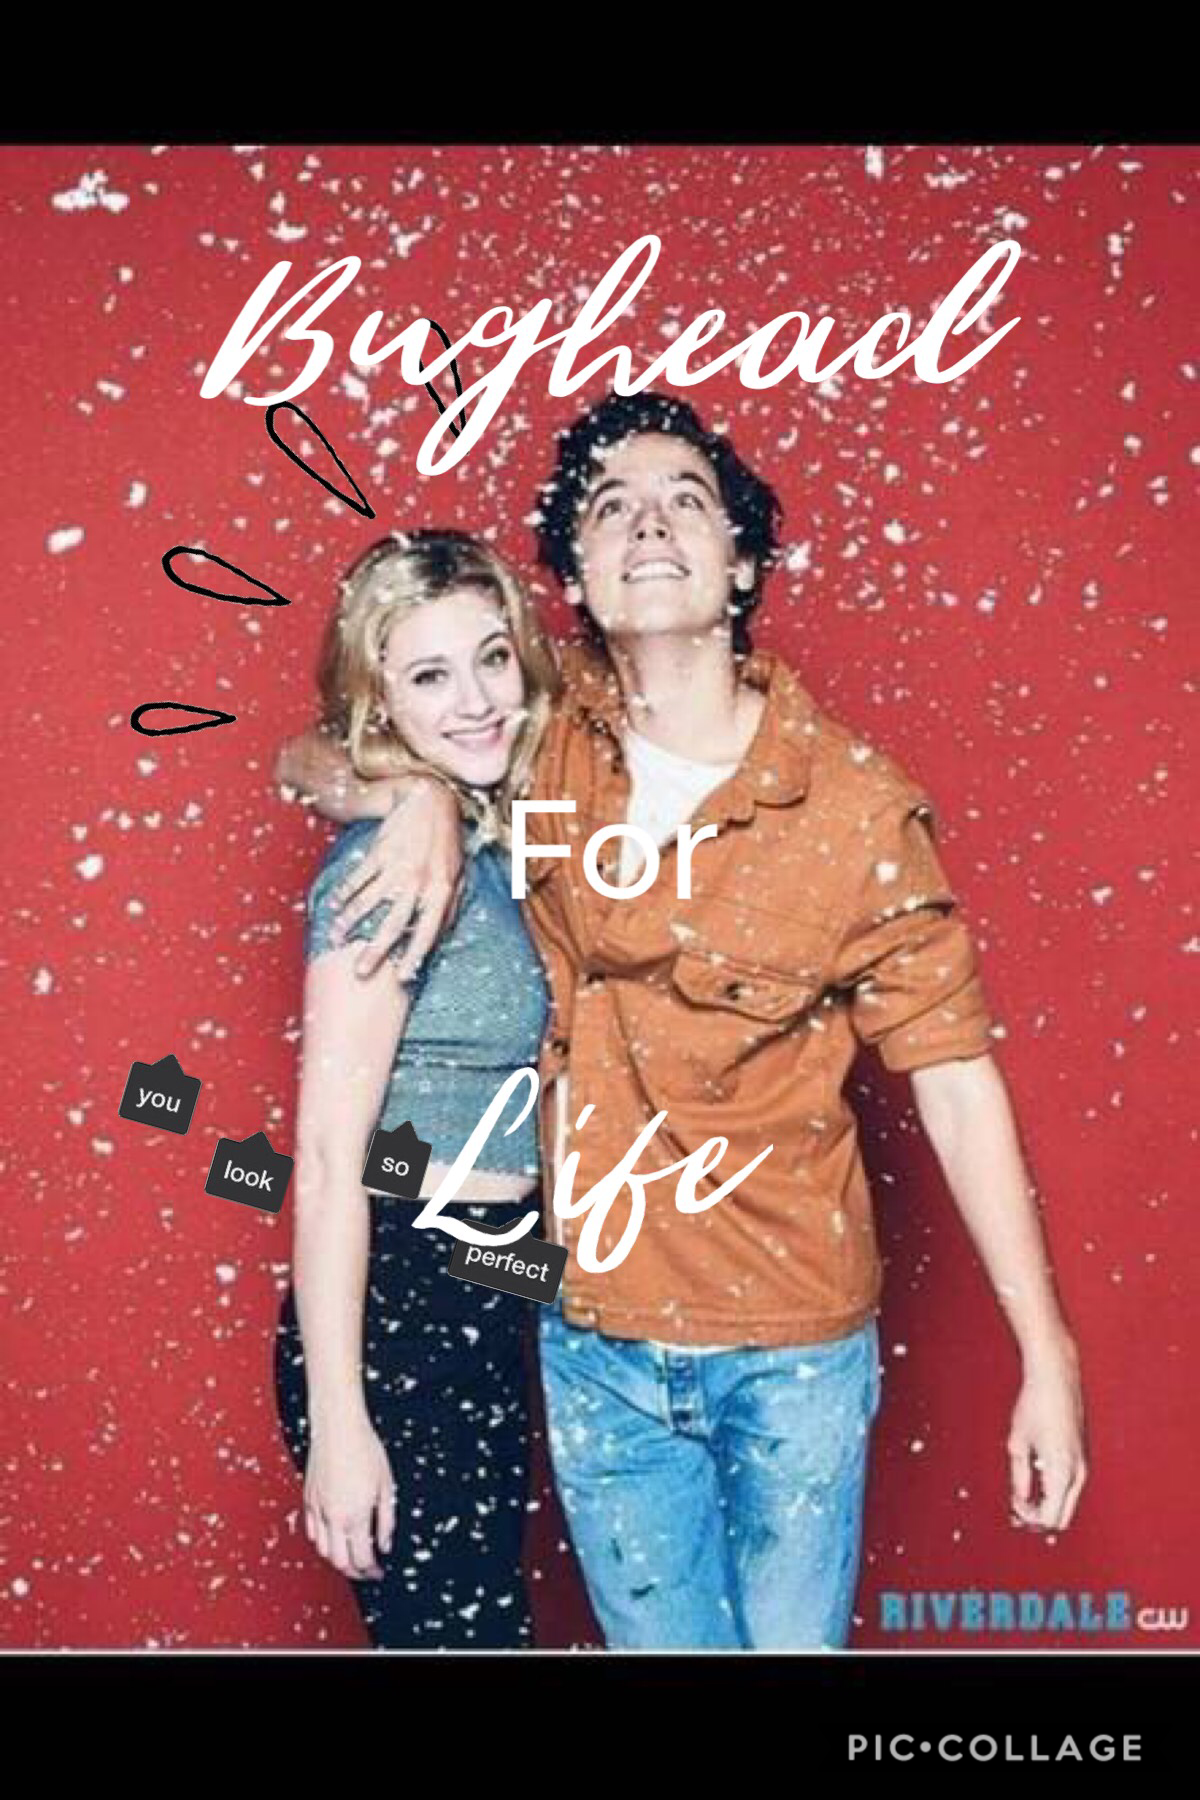 Collab With The Awesome unicorn_edit💛 Tap 💛

QOTD:Favourite Riverdale Couple

AOTD:BUGHEAD💛